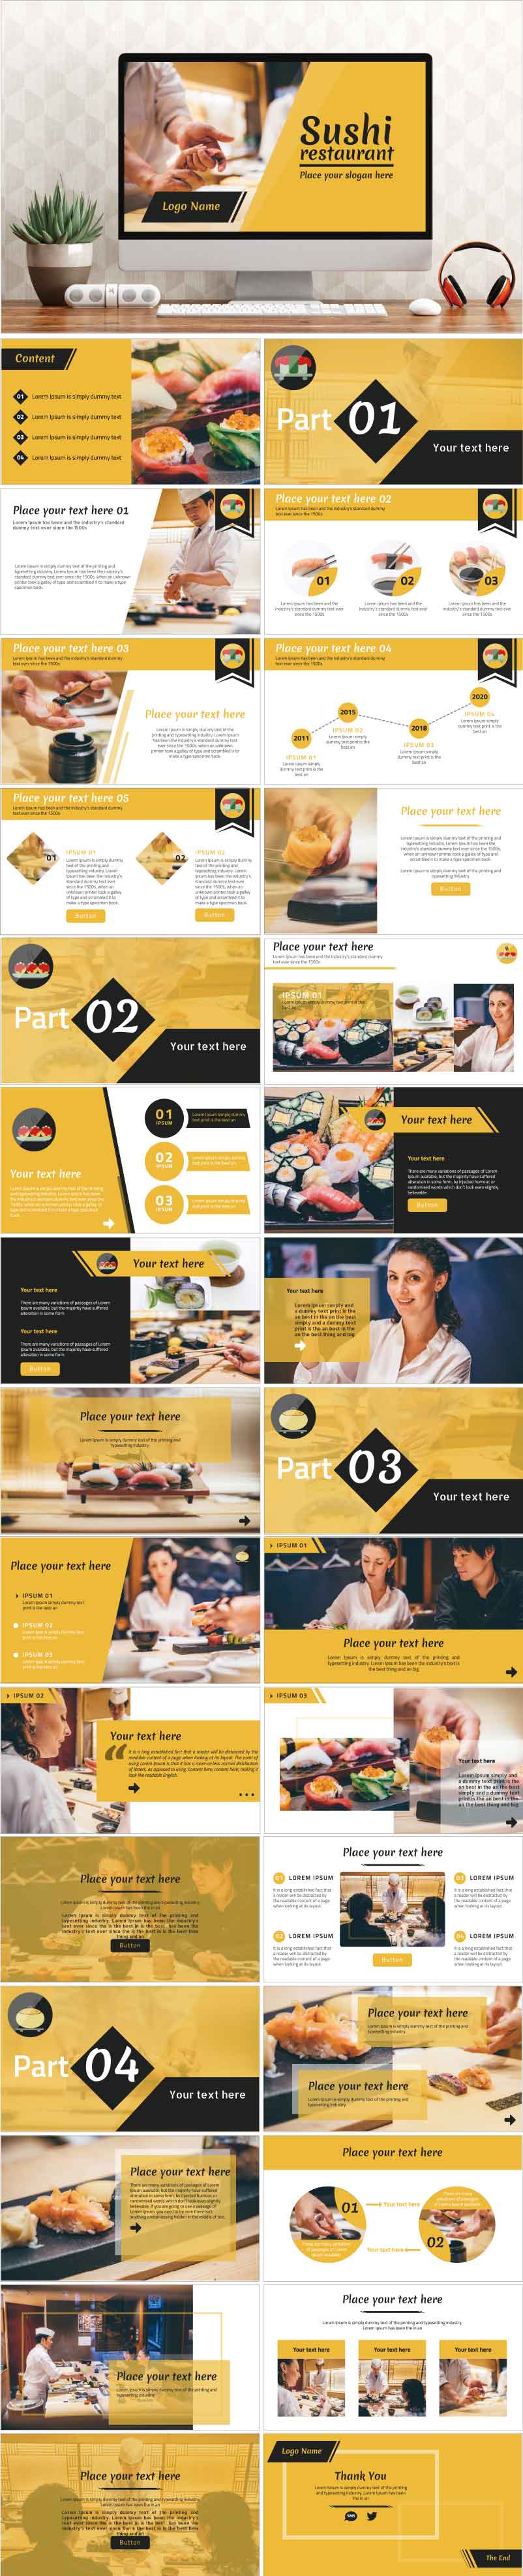 PowerPoint template vol.35